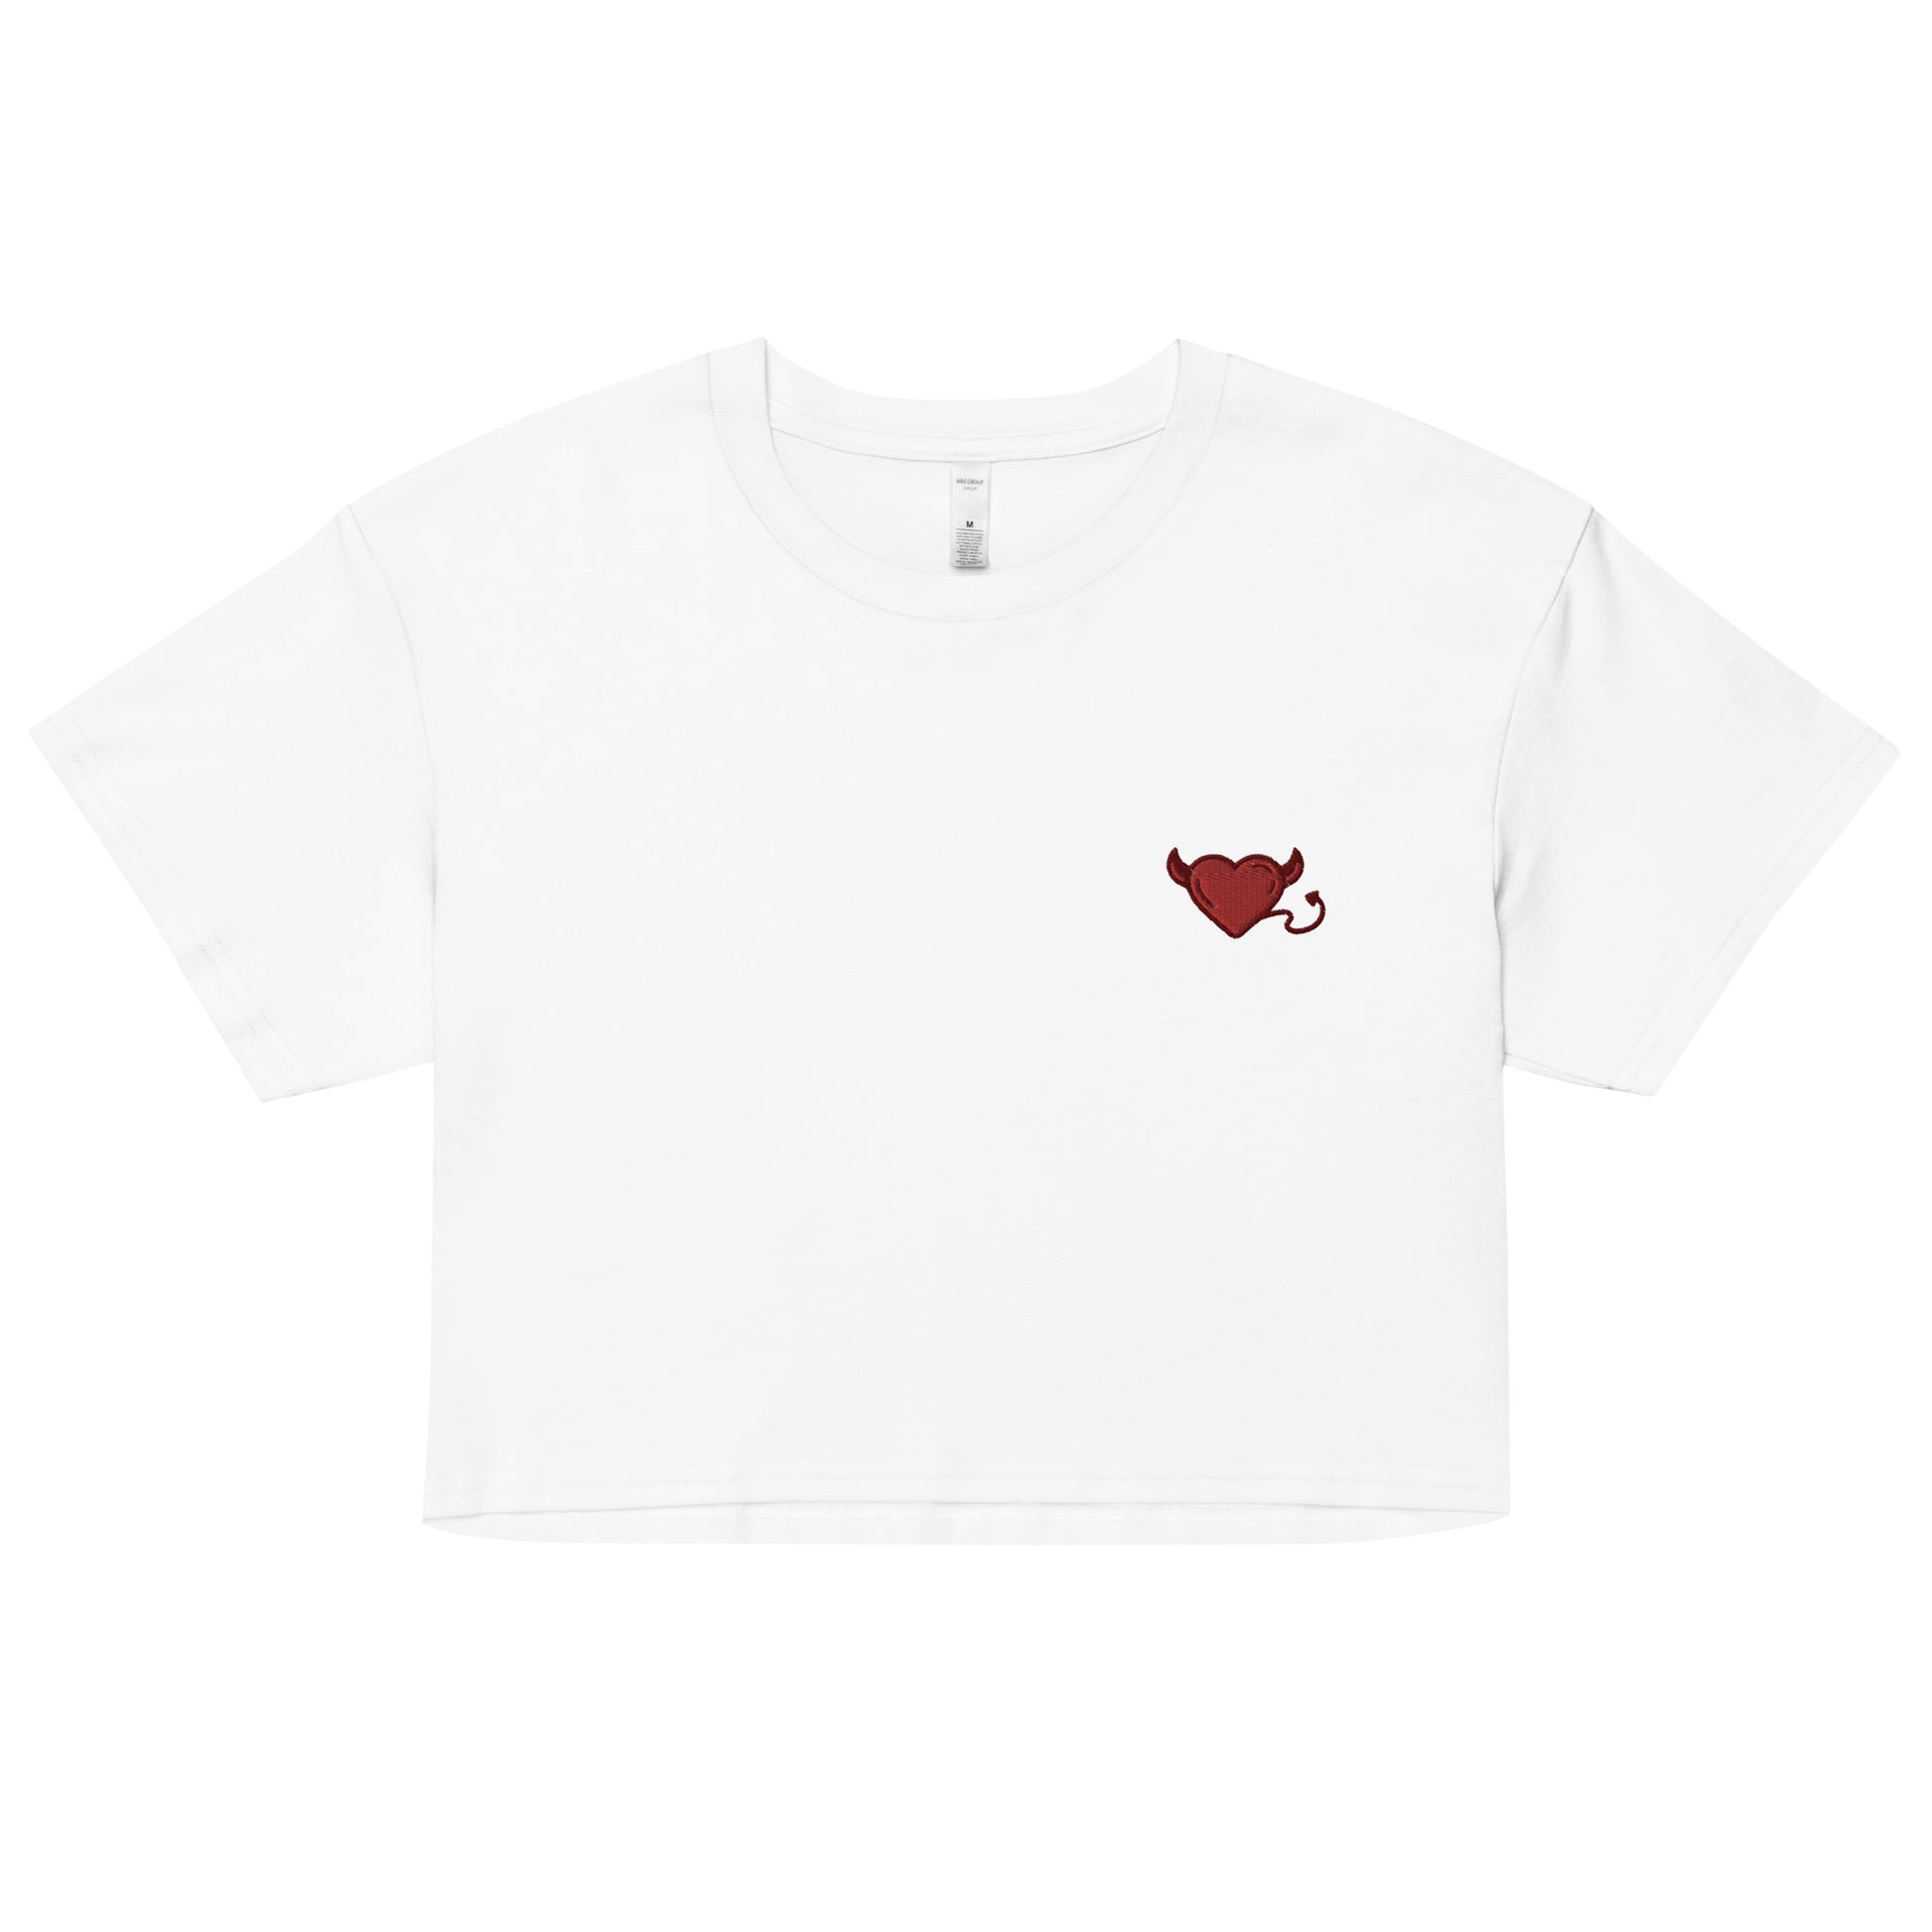 A relaxed, modest white crop top features a subtle red embroidery featuring a devil's heart. Adding a touch of mischief to your look—a playful celebration of lgbtq culture! Made from 100% combed cotton. Available in Extra Small, Small, Medium, Large, Extra Large.